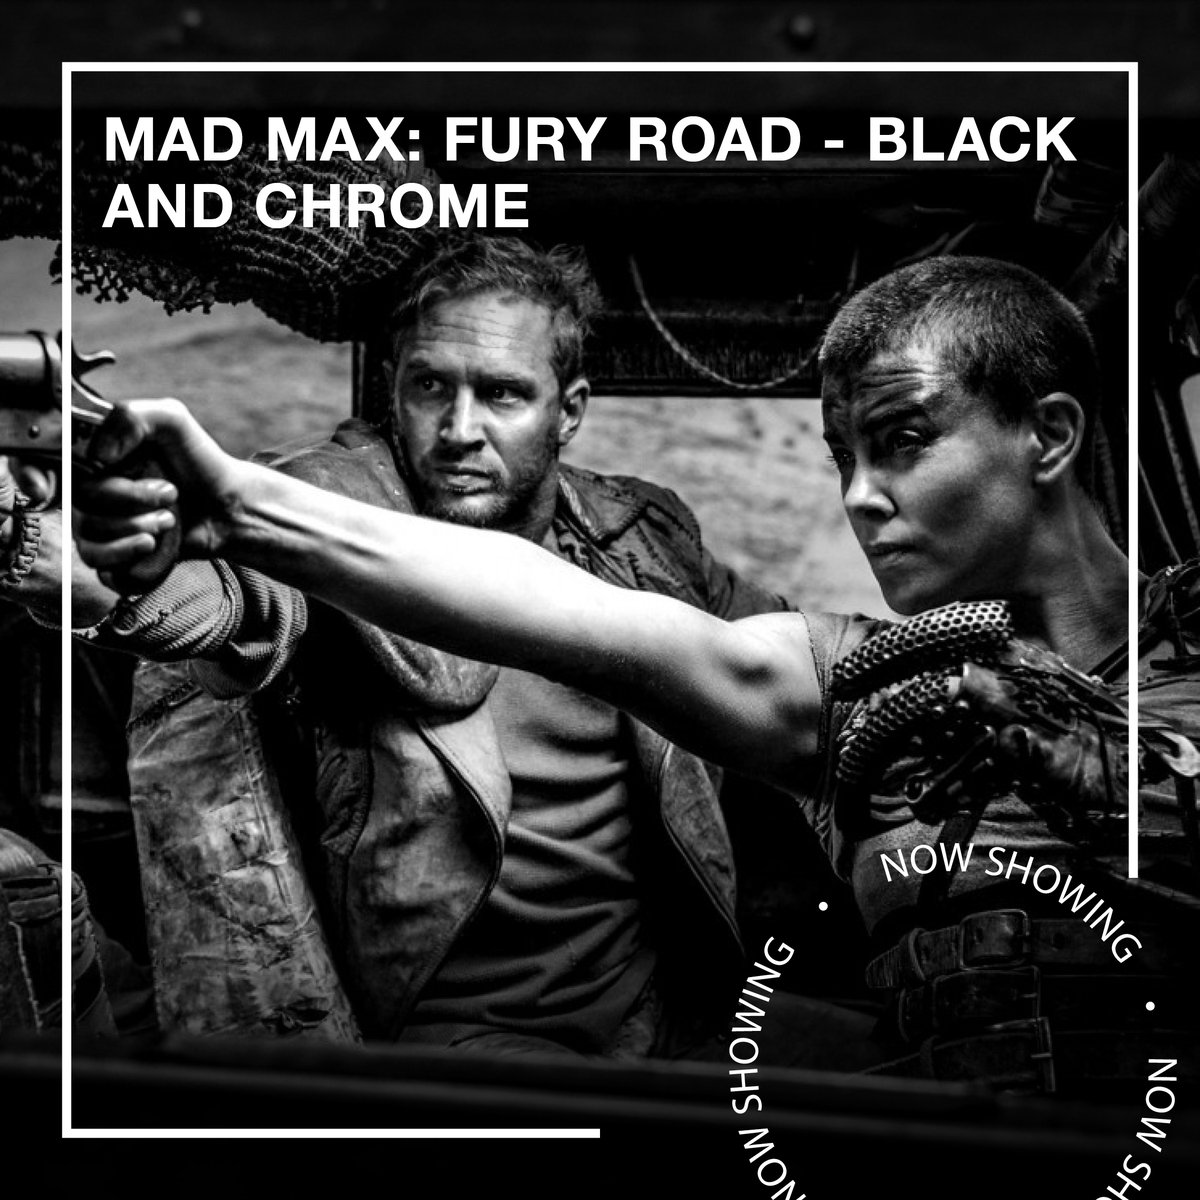 Support Dundee's only indie cinema and enjoy great films this week, including... 🌟Challengers 🌟Io Capitano 🌟Close Your Eyes 🌟Mad Max: Fury Road - Black and Chrome 🌟Spirit of the Beehive Get your tickets now 🎉 -tinyurl.com/4kuh575k